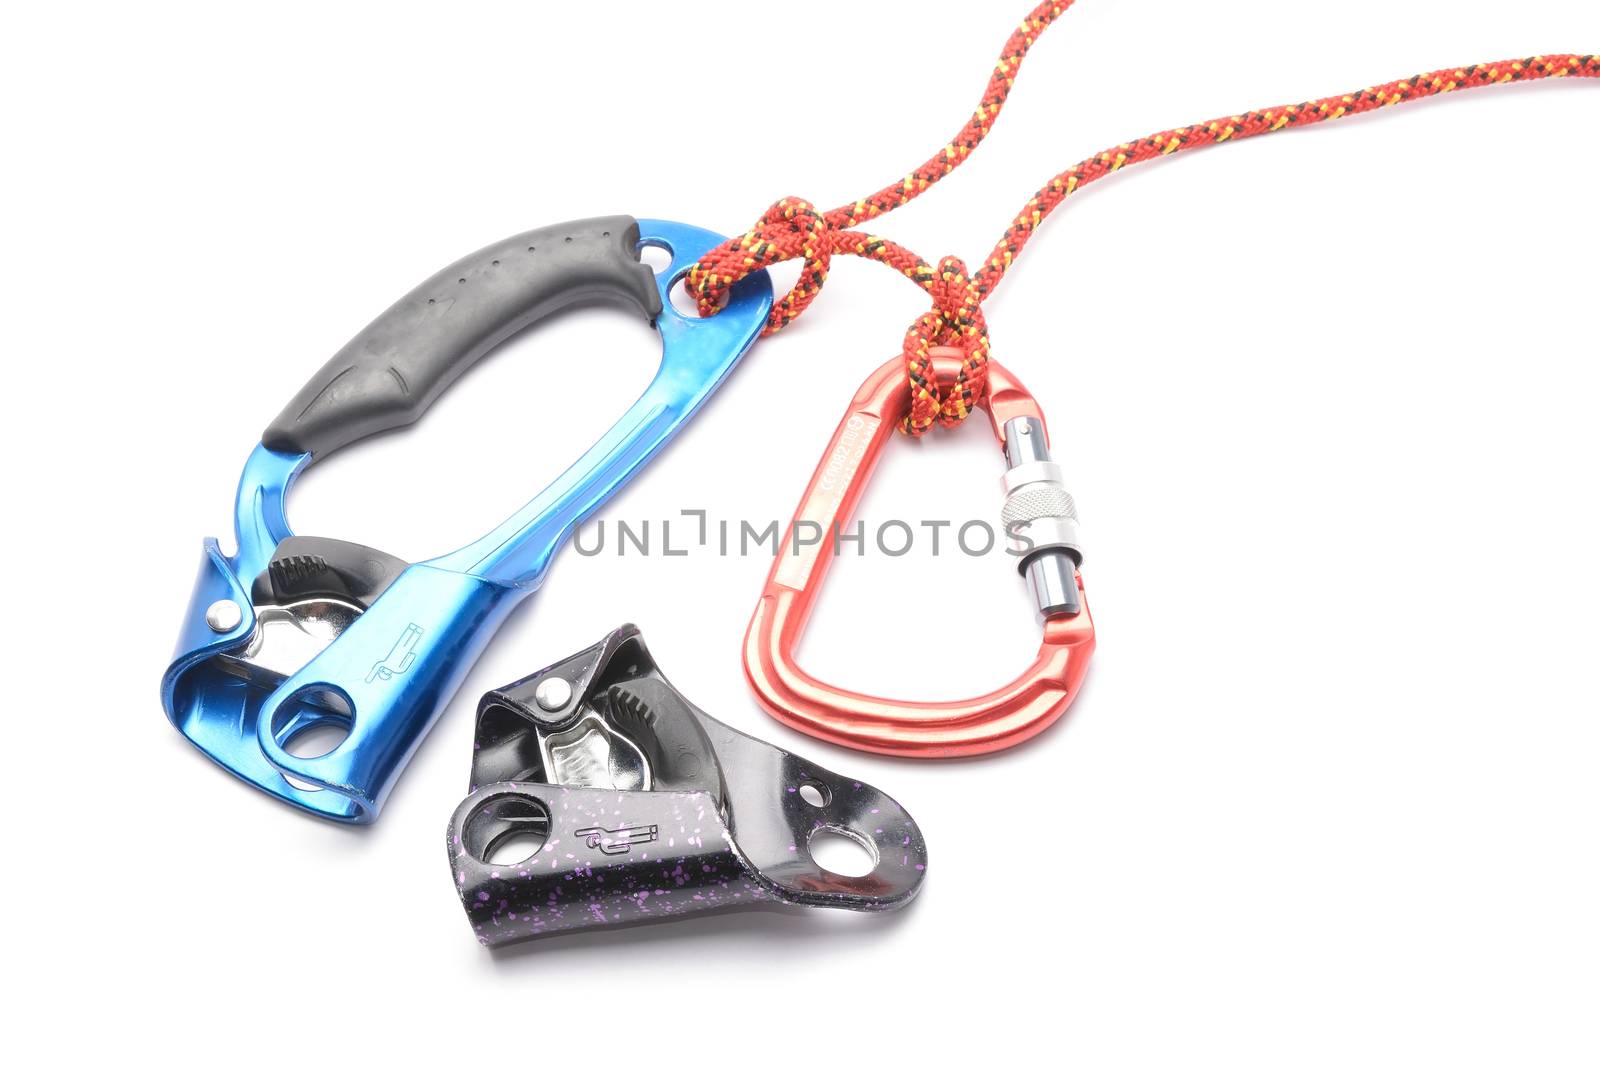 the croll chest ascender isolated on white. Climbing tool.